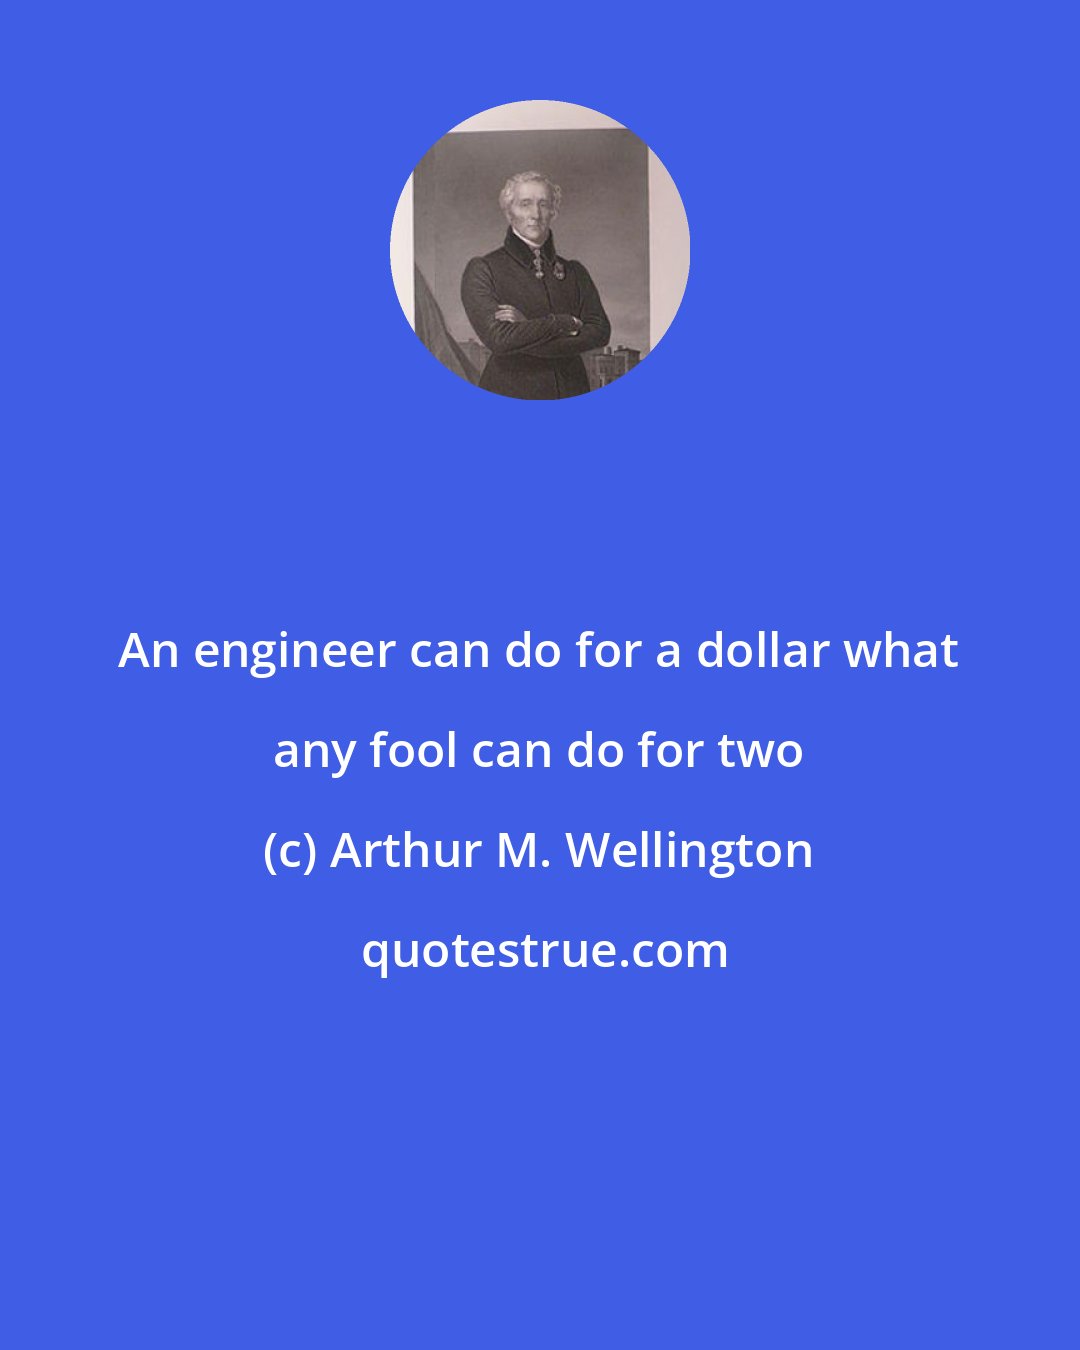 Arthur M. Wellington: An engineer can do for a dollar what any fool can do for two